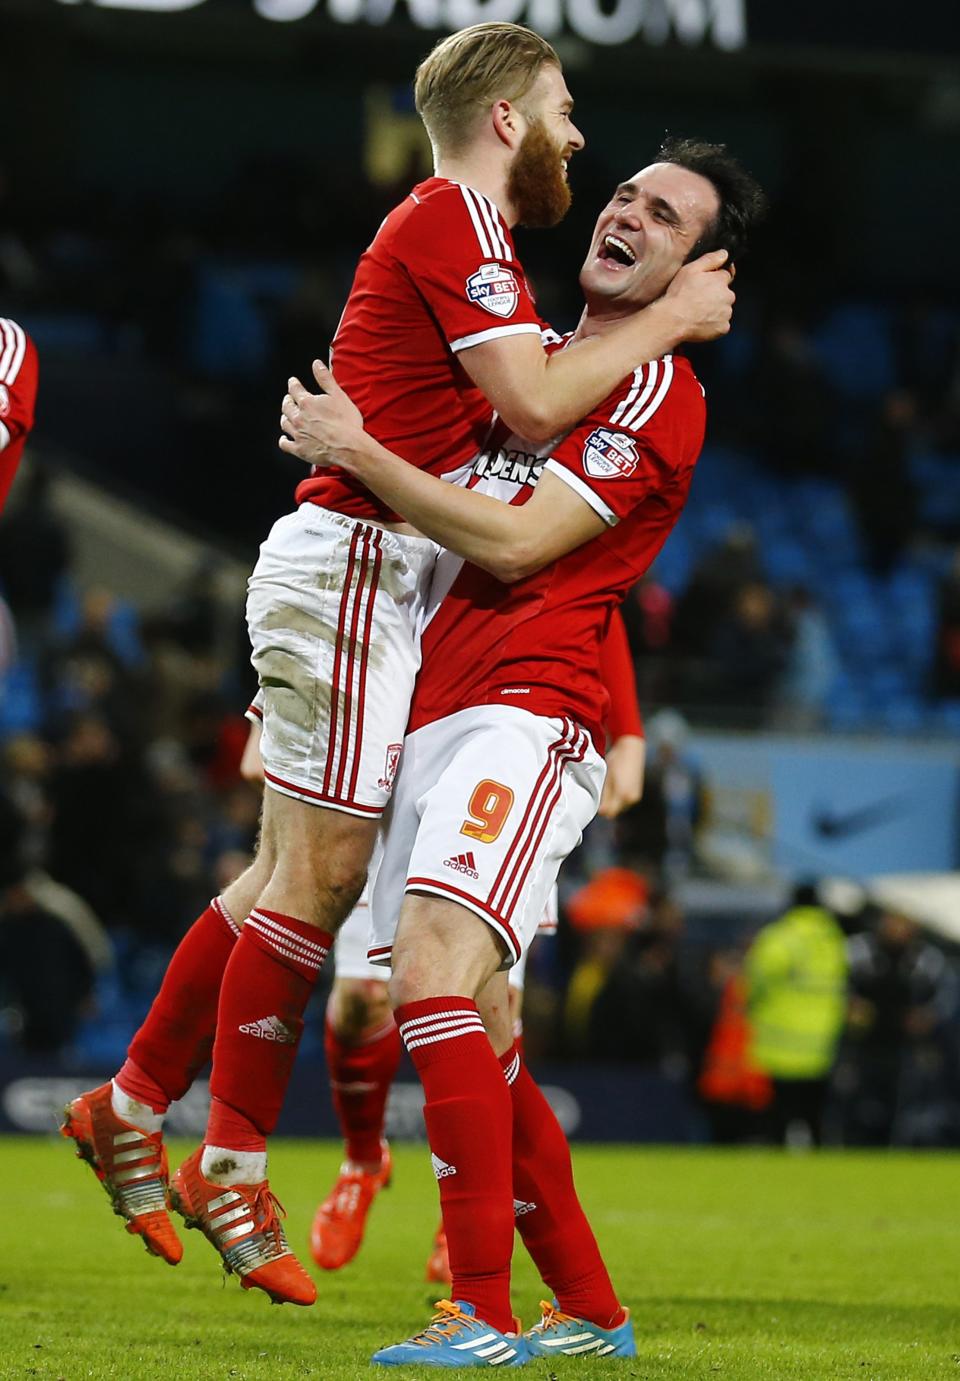 Middlesbrough's Kike (R) celebrates with Adam Clayton after beating Manchester City in their English FA Cup 4th round soccer match at the Etihad Stadium in Manchester, northern England, January 24, 2015. REUTERS/Darren Staples (BRITAIN - Tags: SPORT SOCCER)